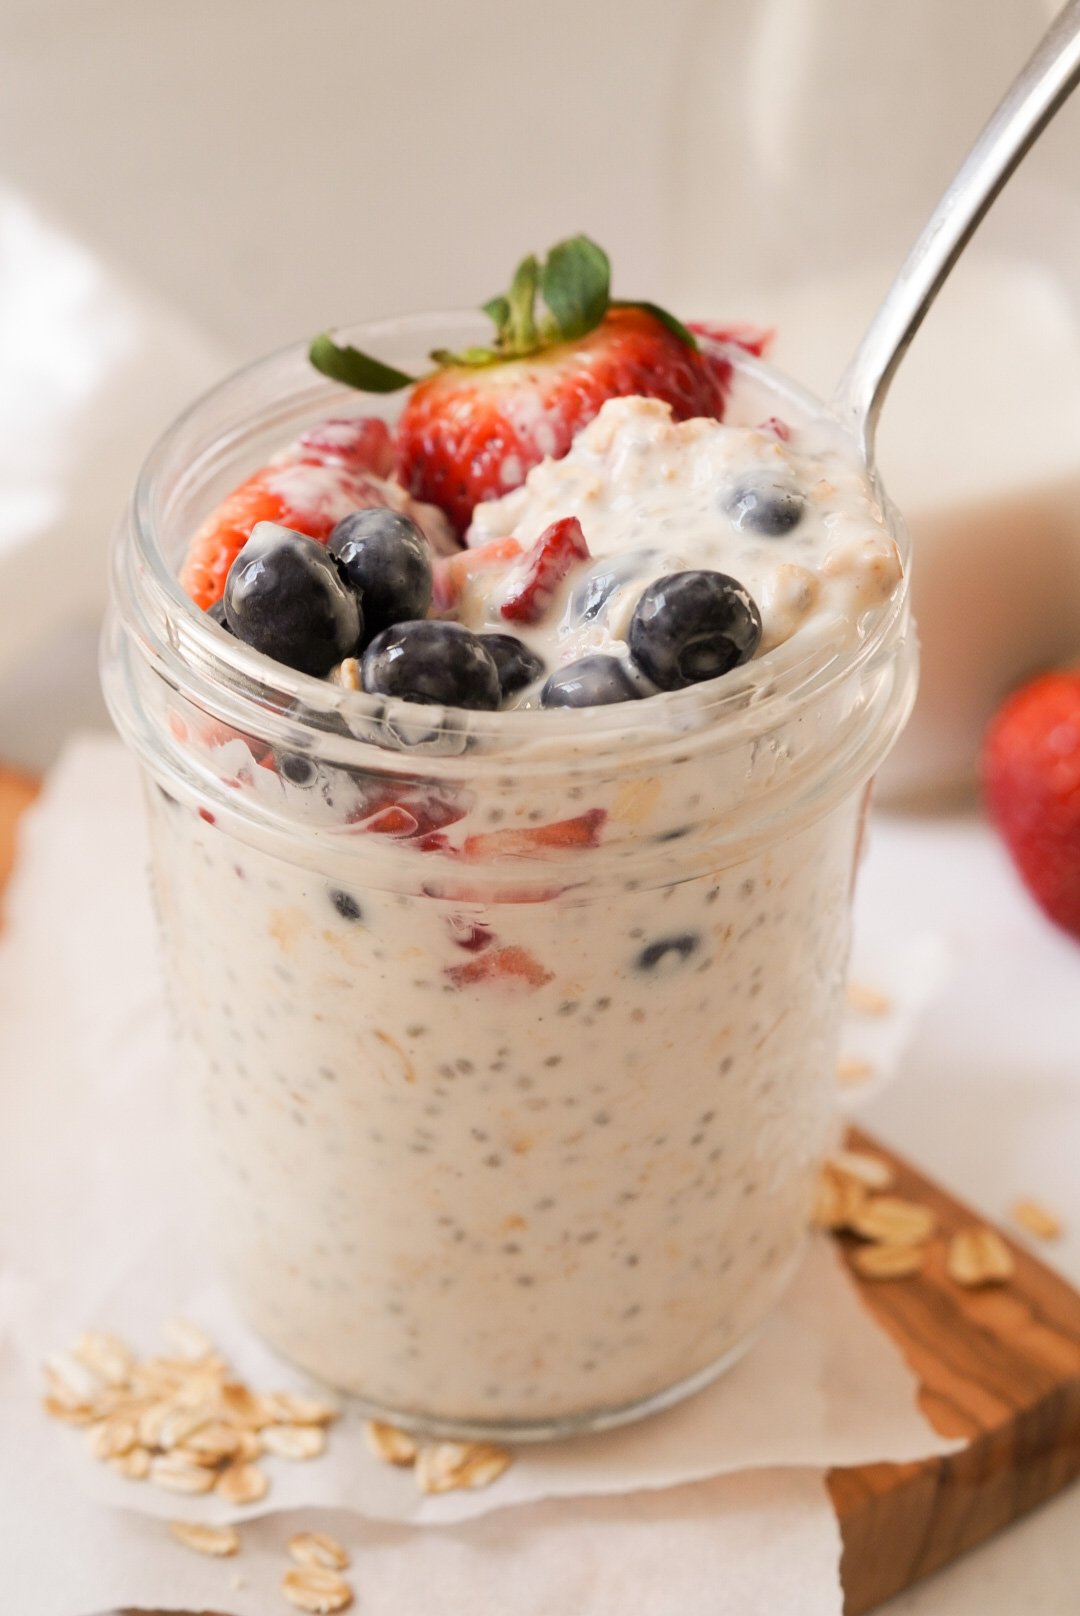 How to Prep Overnight Oats for the Week - Life's Little Sweets